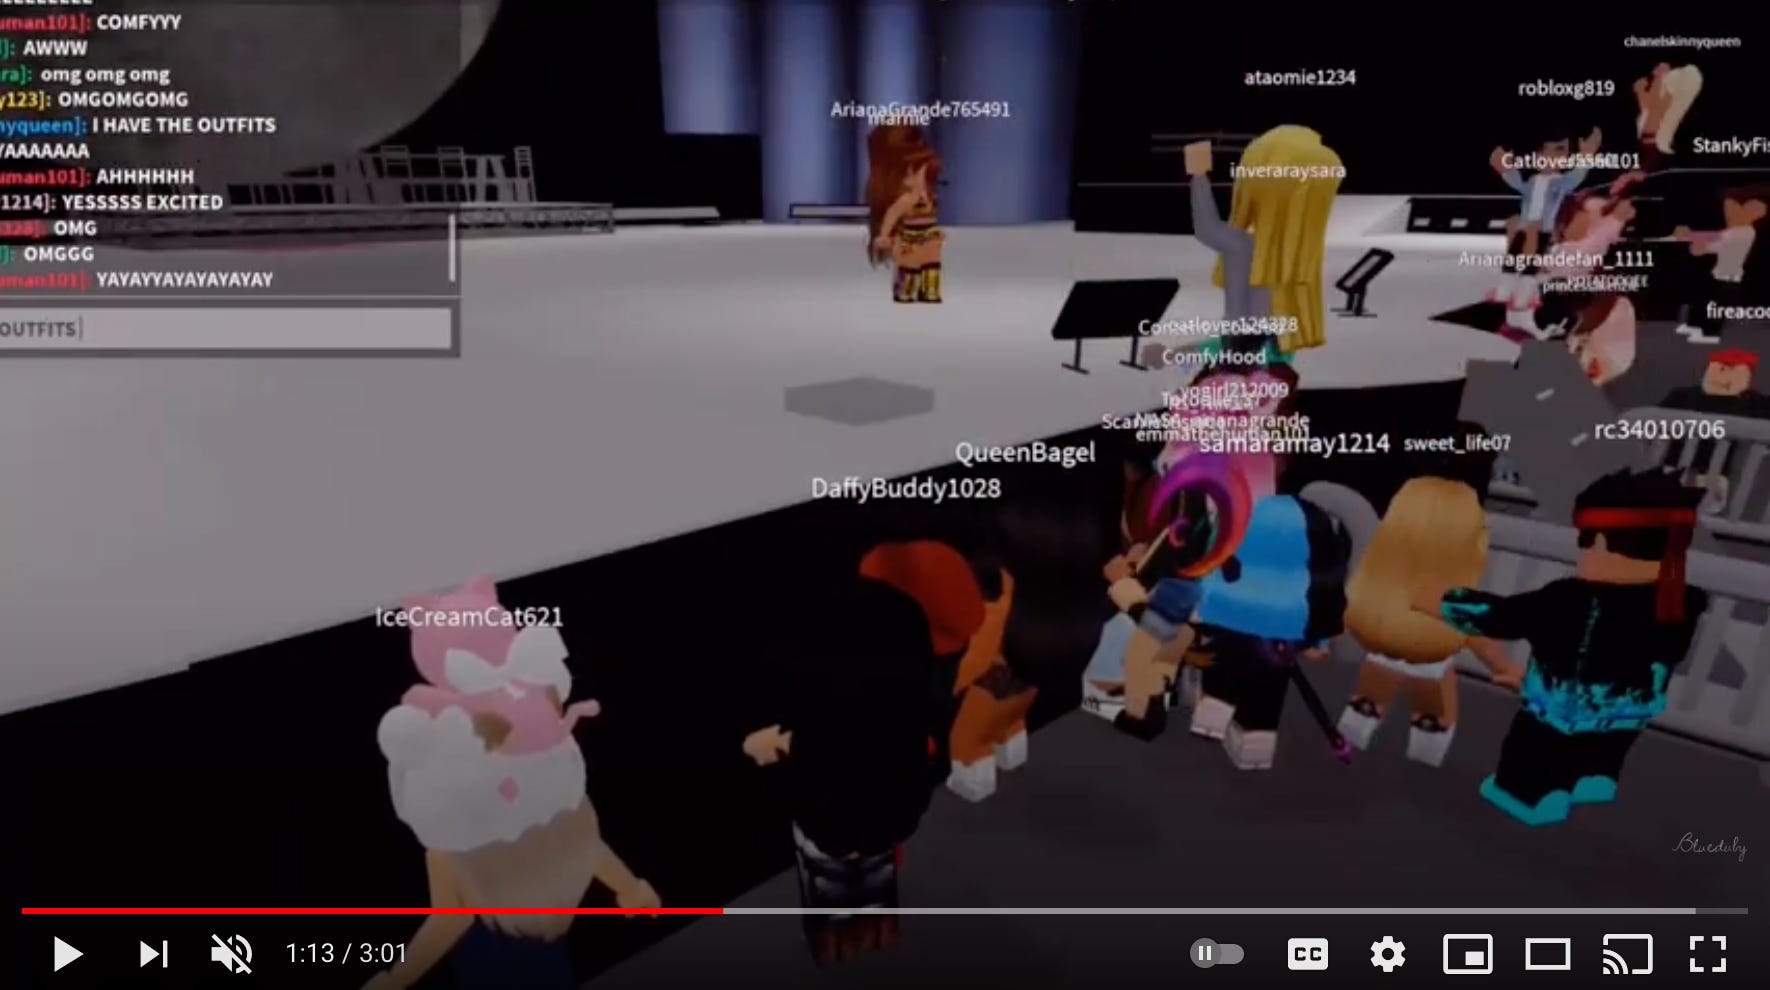 Insane Companies No One Everyone Talks About Episode 3 Roblox By Julie Young Julie Young S Newsletter - roblox 2004 avatar